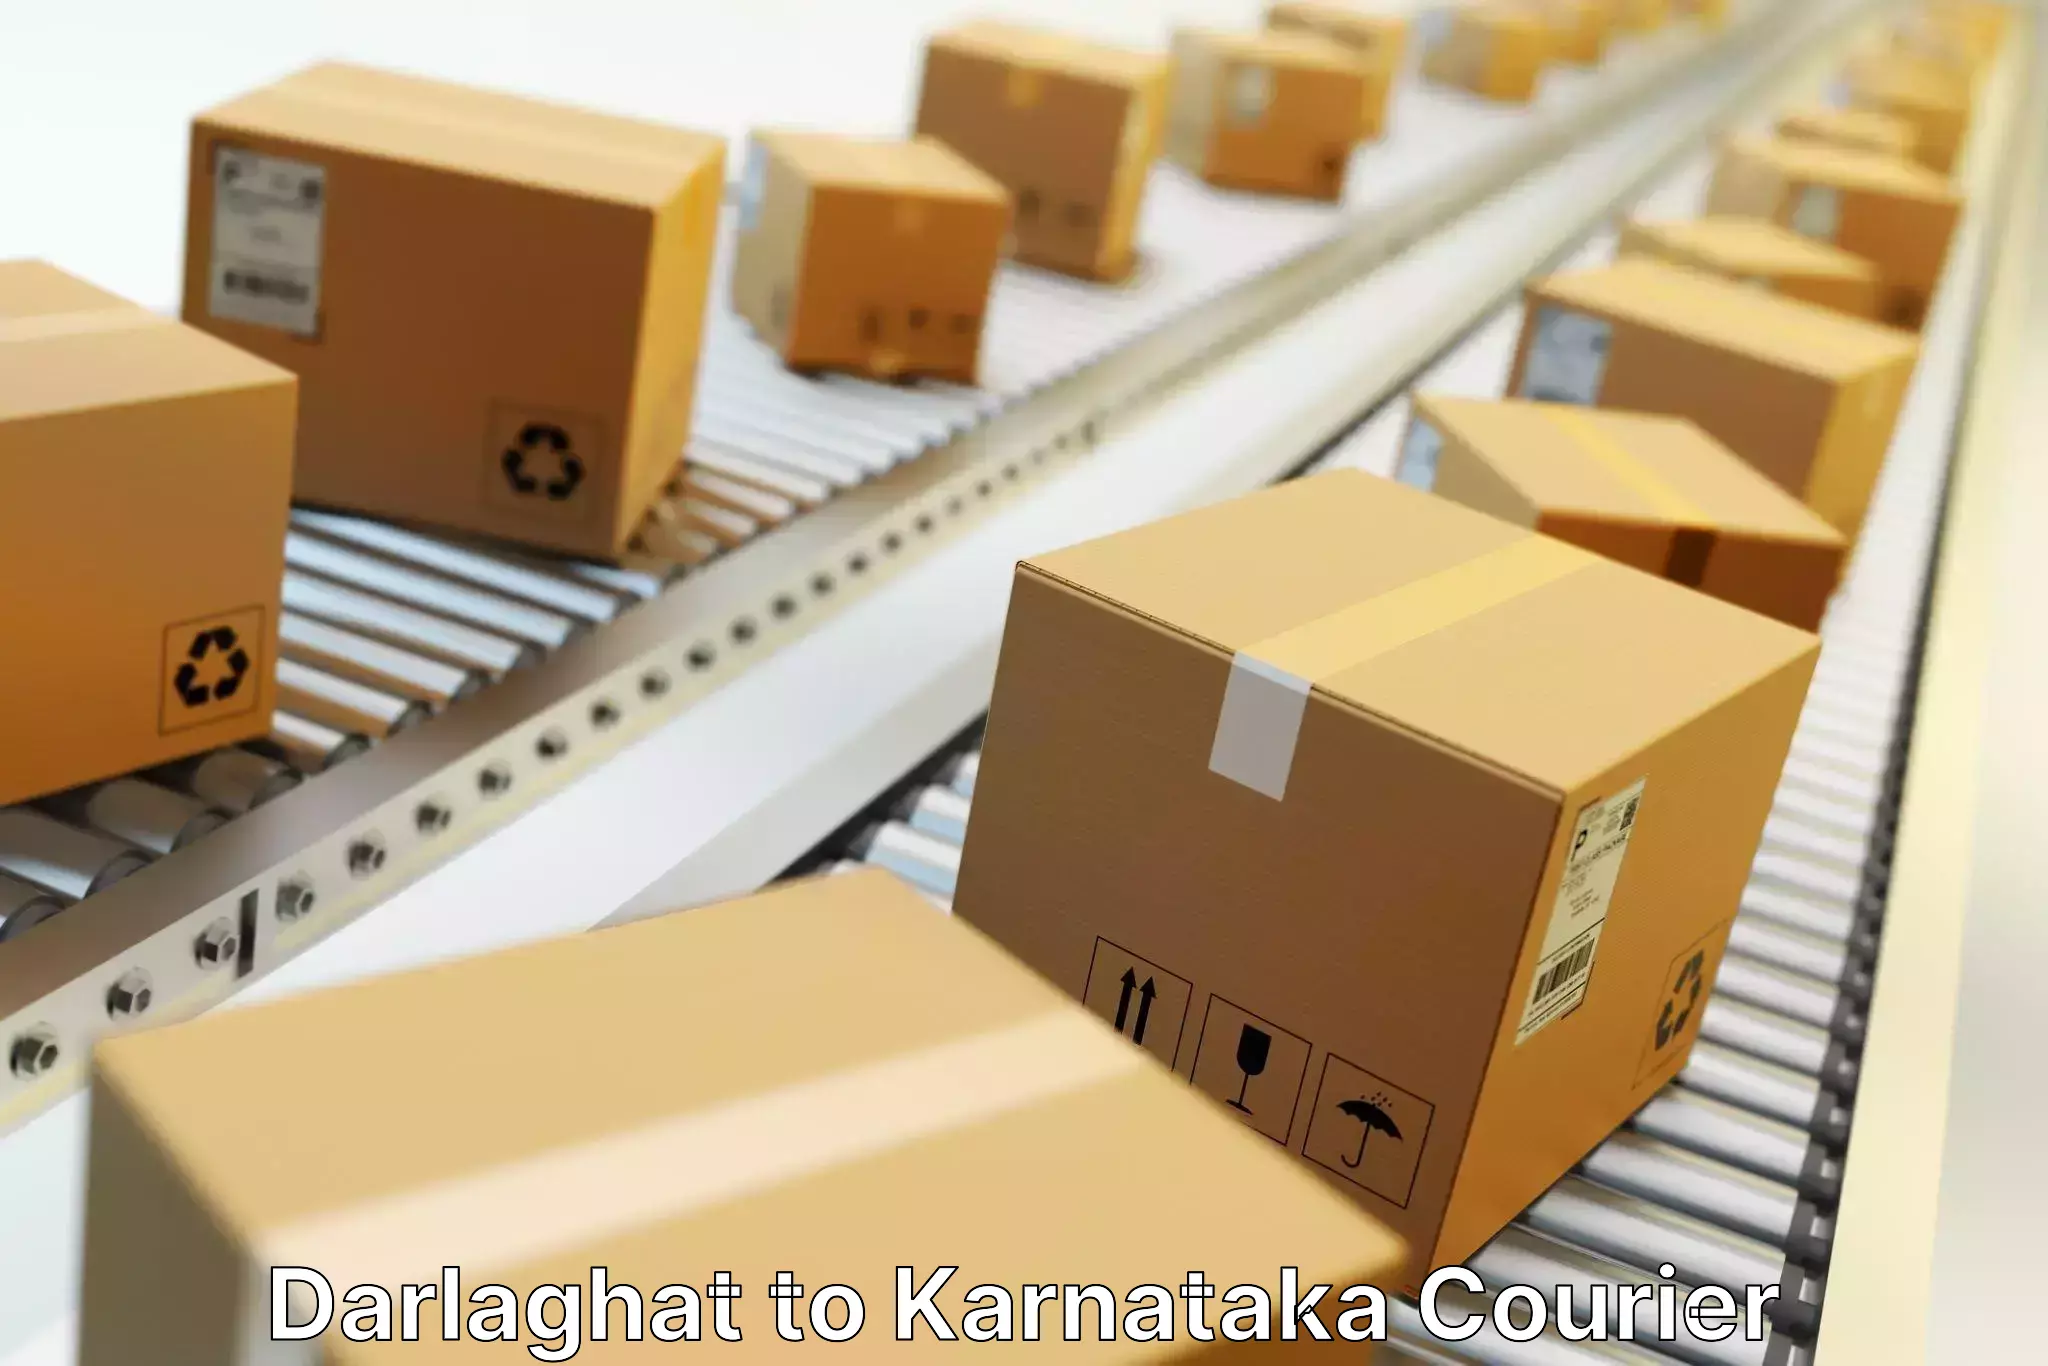 Subscription-based courier Darlaghat to Chikkamagaluru